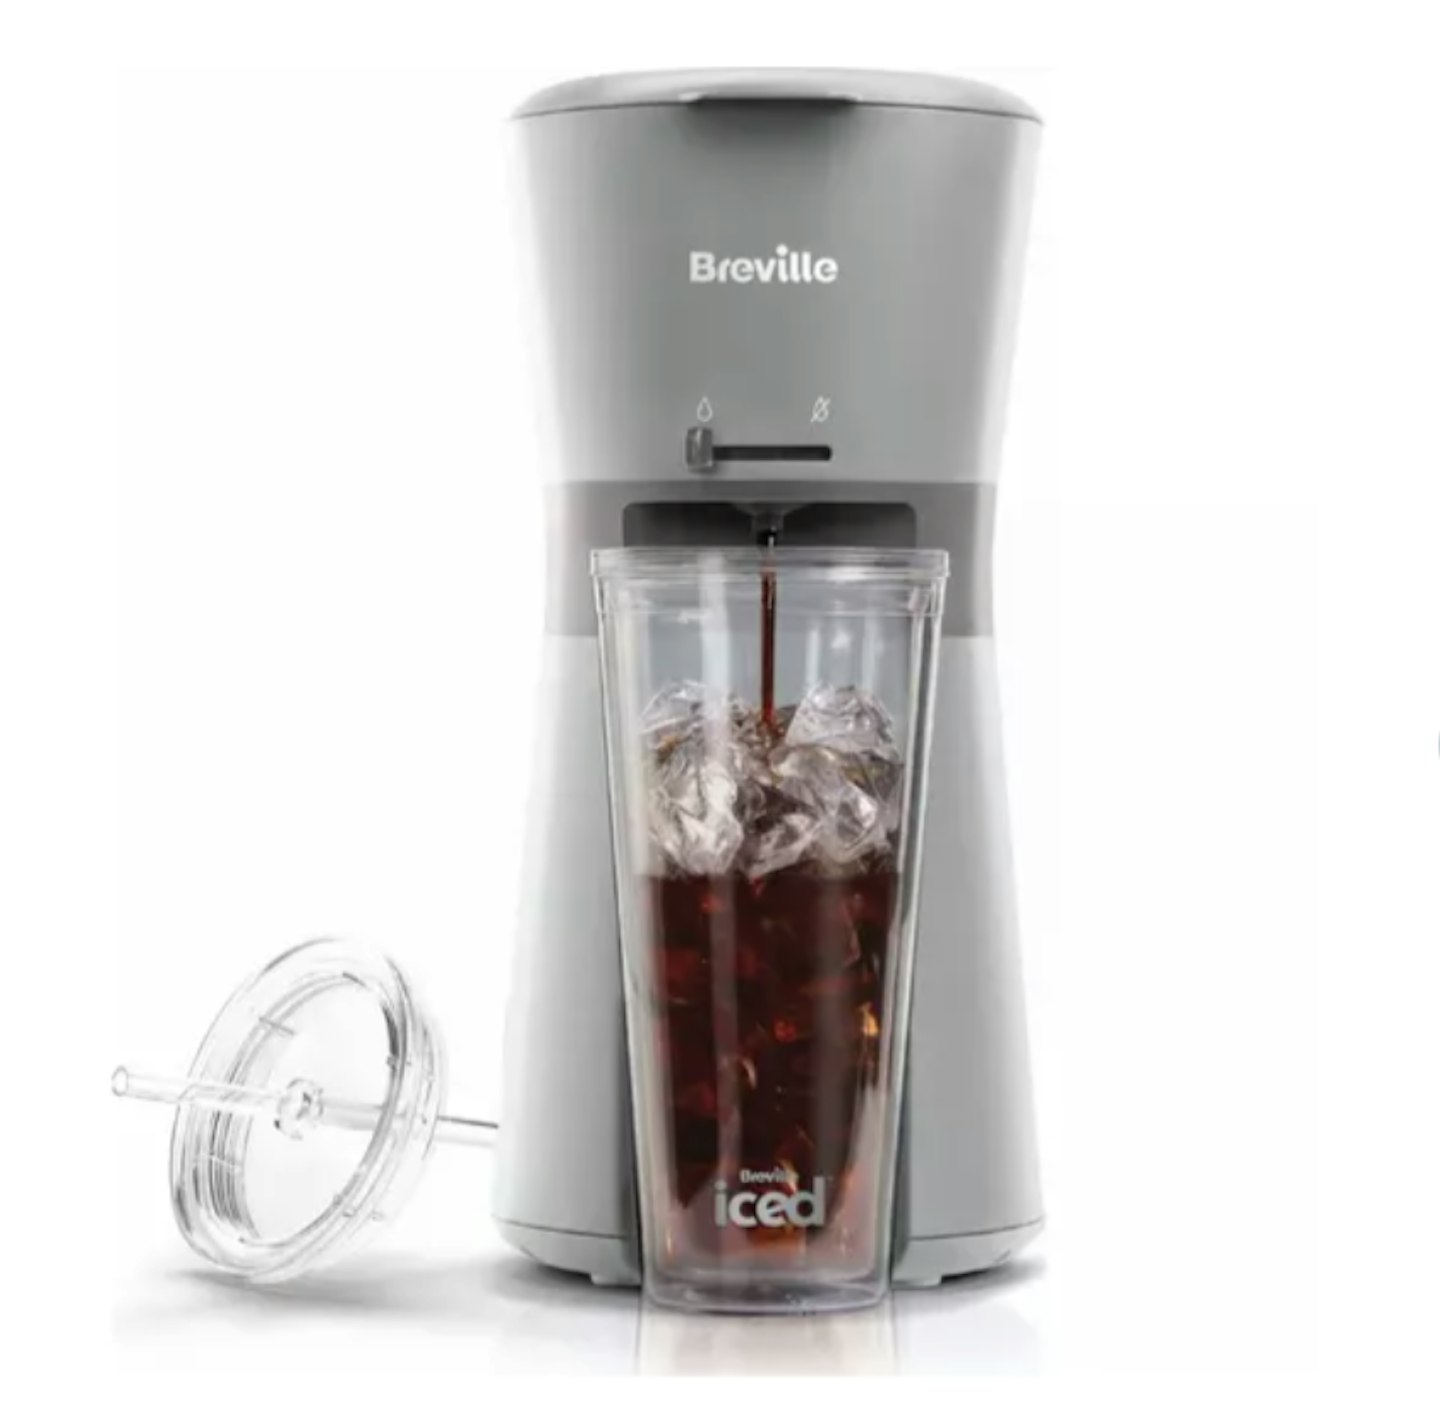 BREVILLE VCF155 Iced Coffee Machine